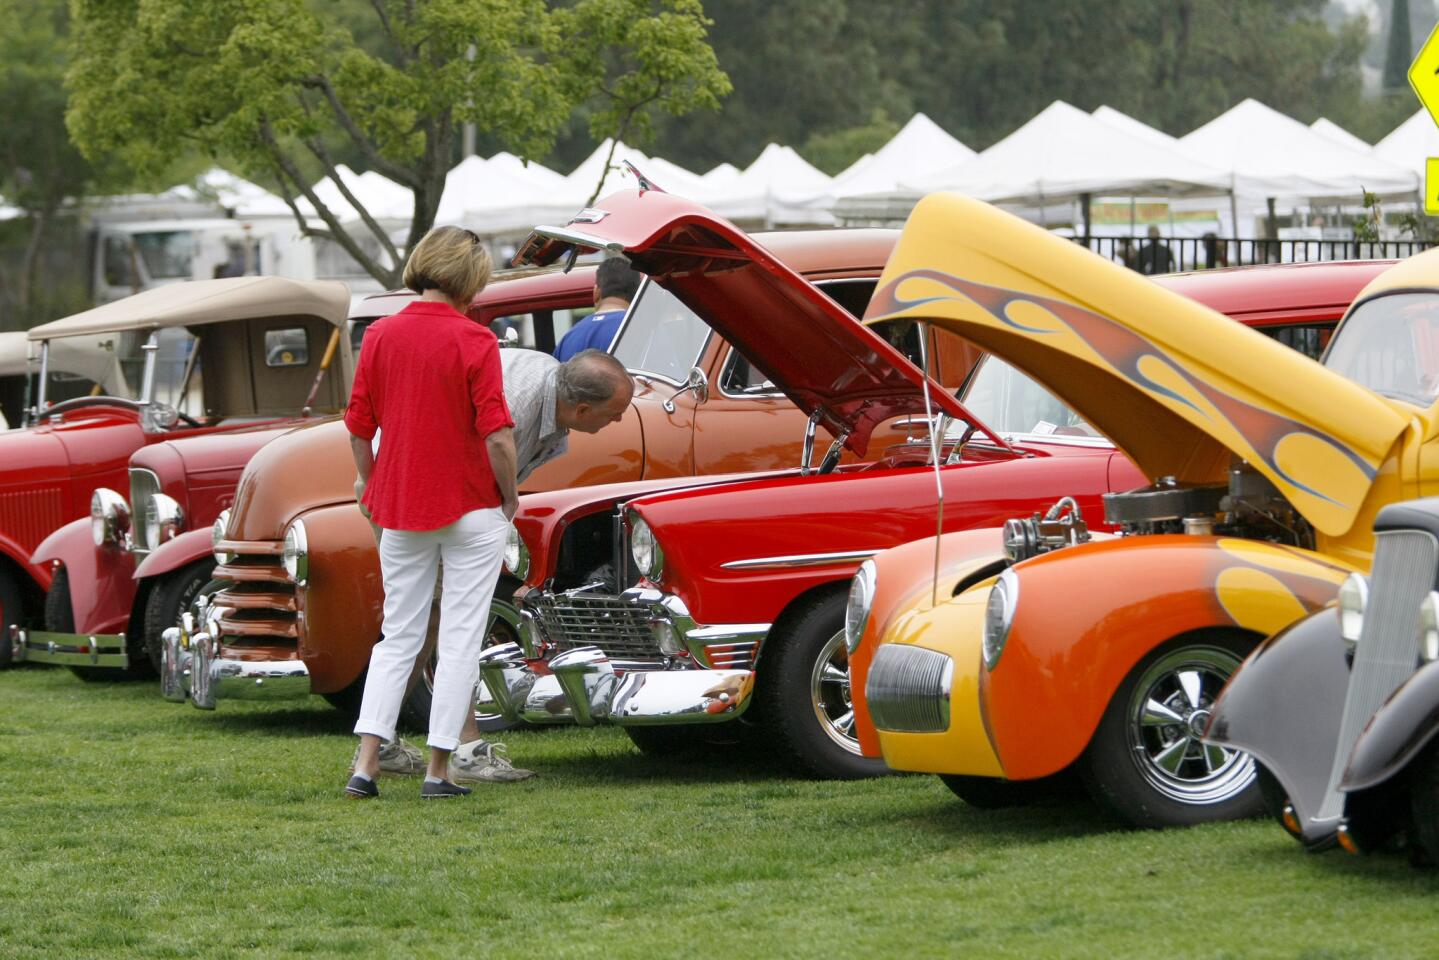 Attendees enjoyed the classic cars on display at the Kiwanis Club of La Canada A.M. annual community breakfast and car show at Memorial Park in La Canada Flintridge on Saturday, May 24, 2014.